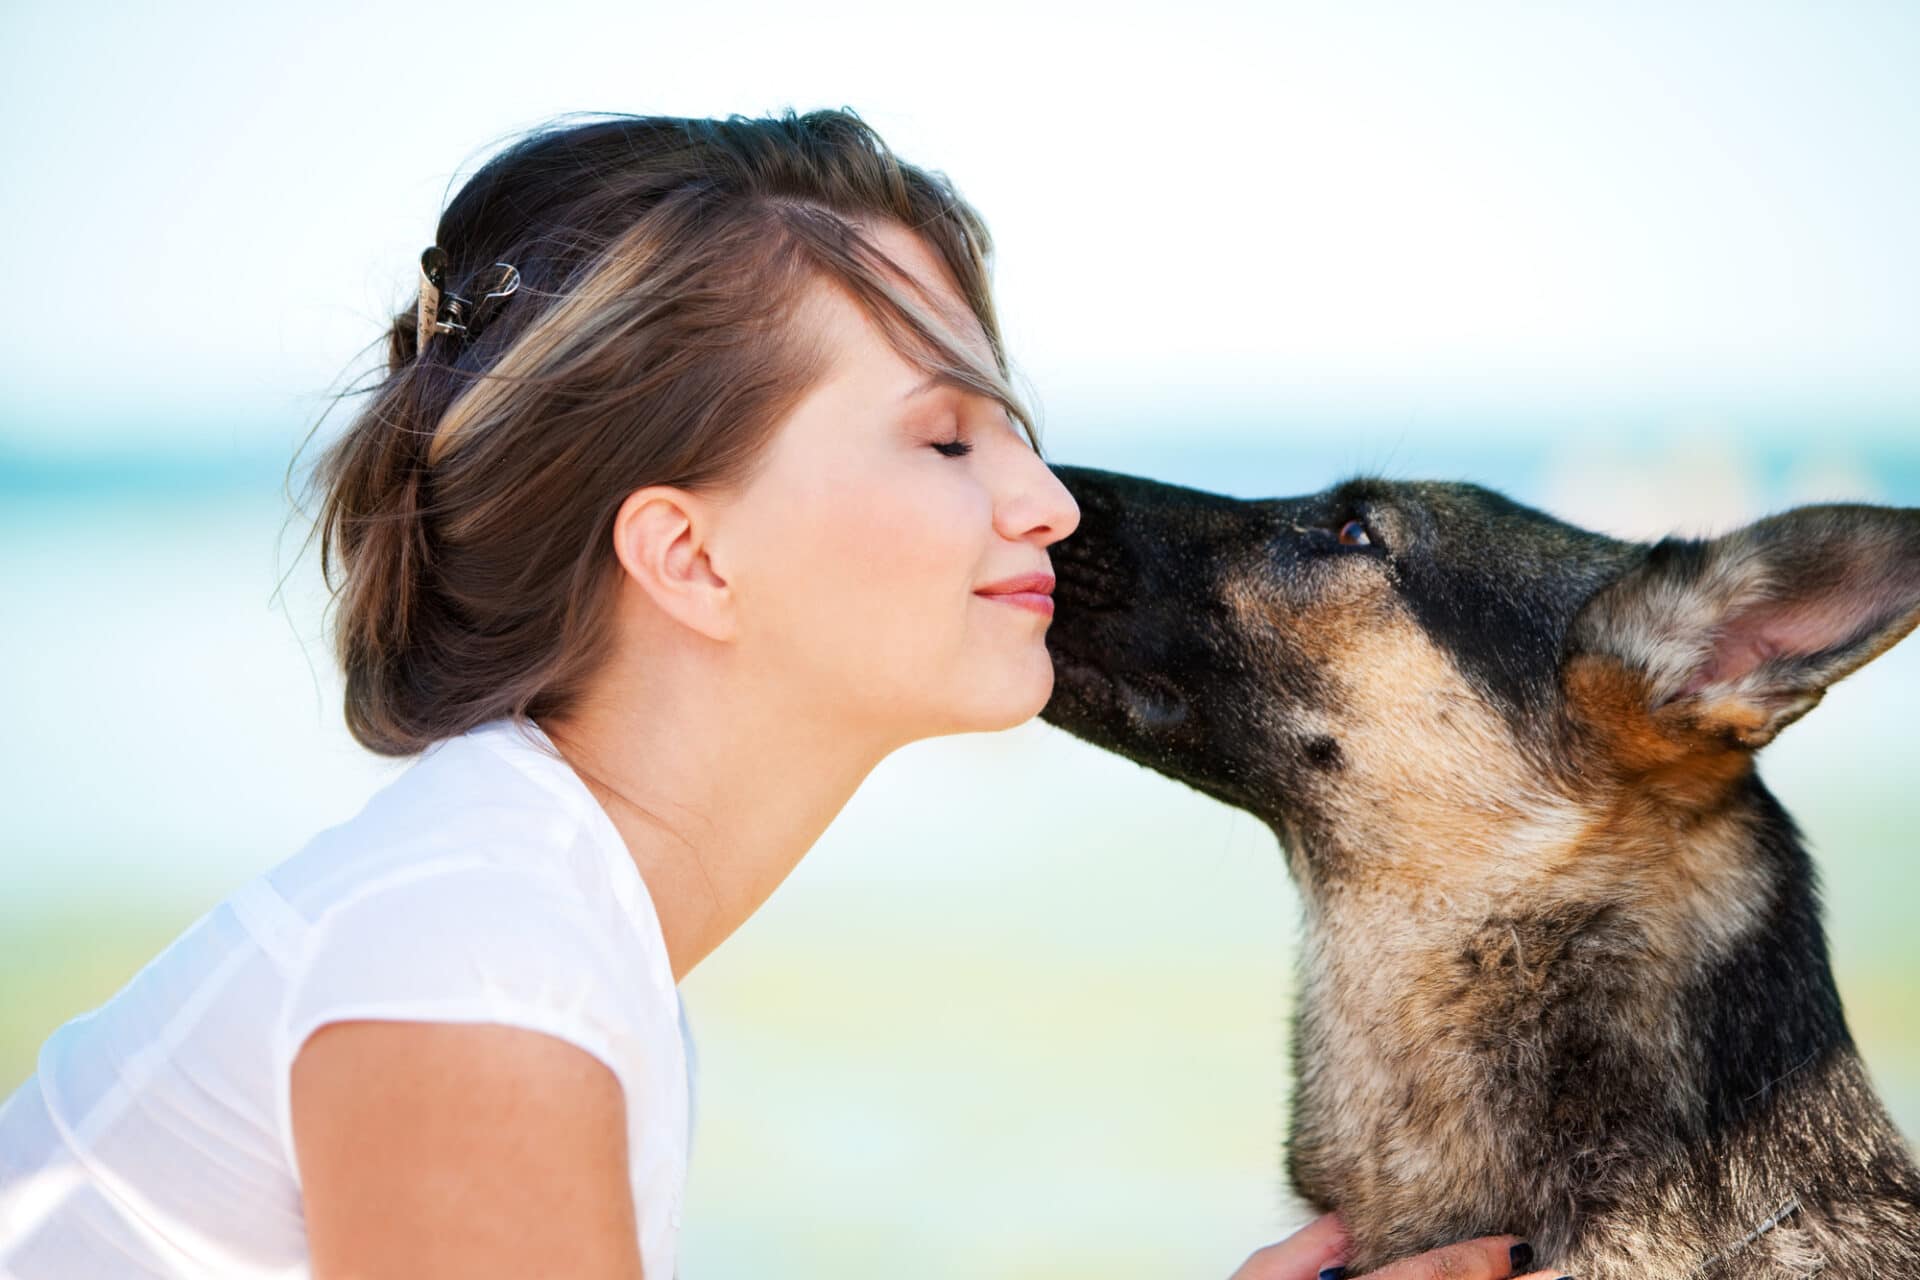 What does it mean when a dog licks your face